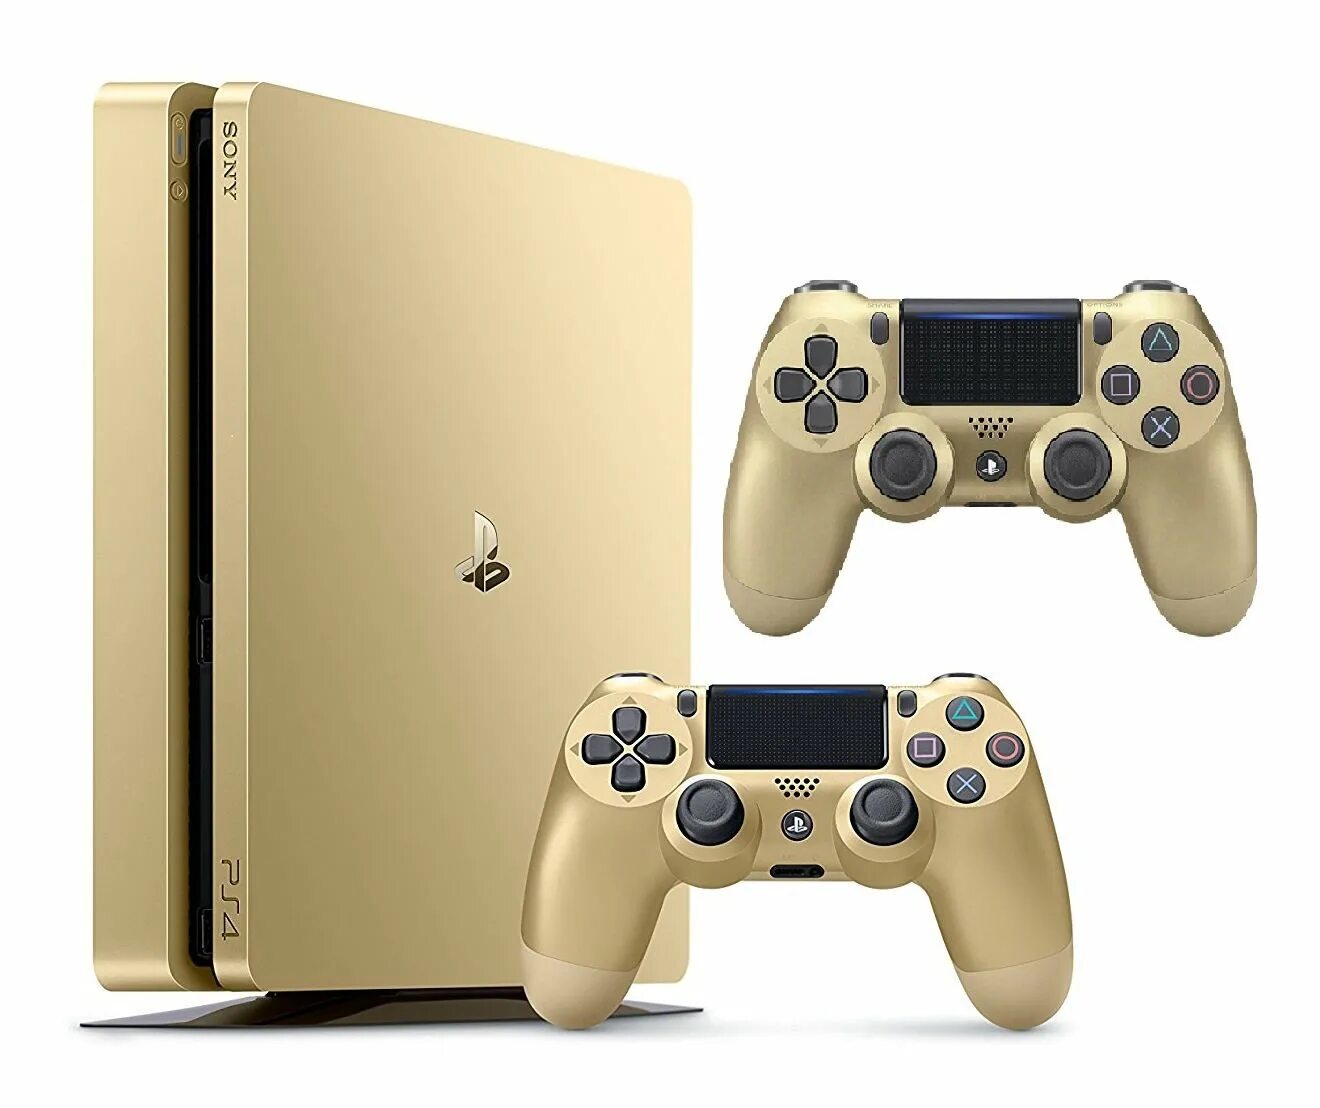 Ps4 gold edition. Ps4 Slim Gold Edition. Dualshock 4 Gold. Ps4 Slim Golden 9.03. Golden ps4 10.01.